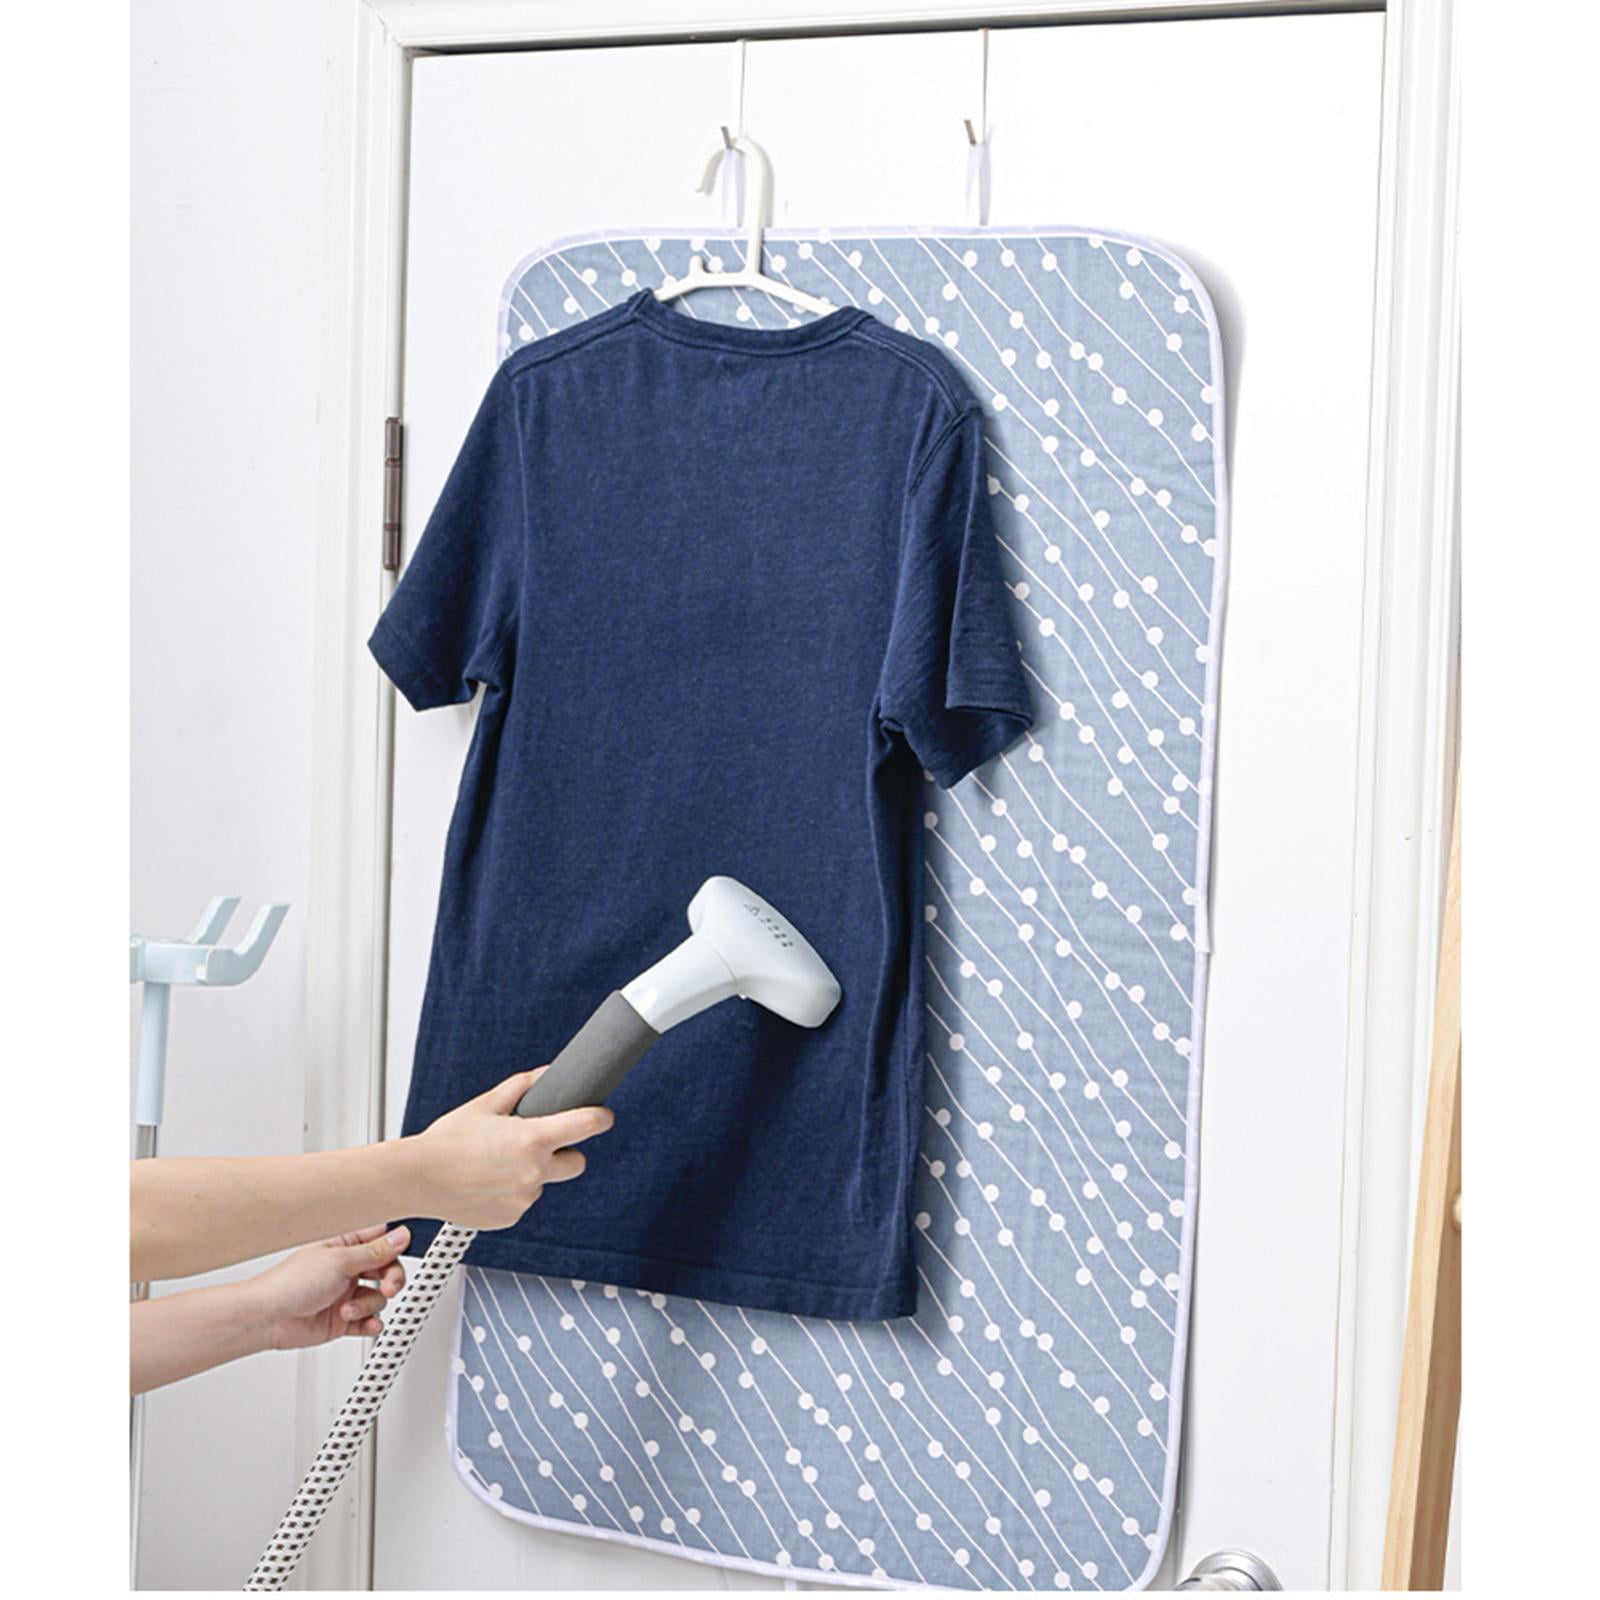 Kigai Herringbone Ironing Mat Portable Travel Ironing Blanket Foldable  Quilted Heat Resistant Ironing Pad Iron Board Alternative Cover for Washer